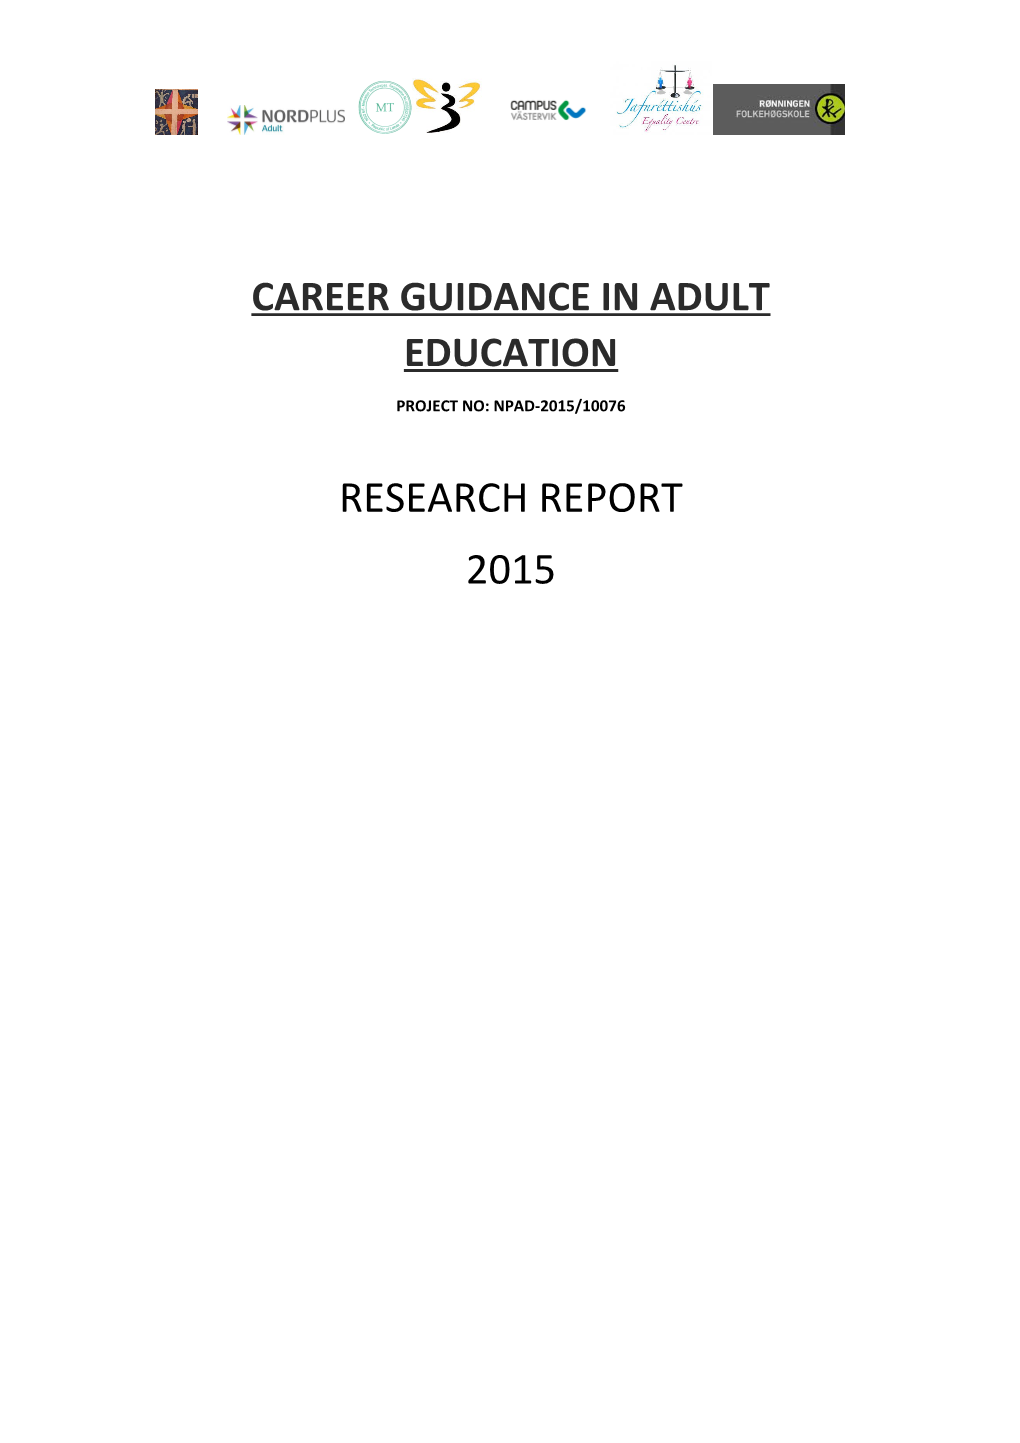 Career Guidance in Adult Education